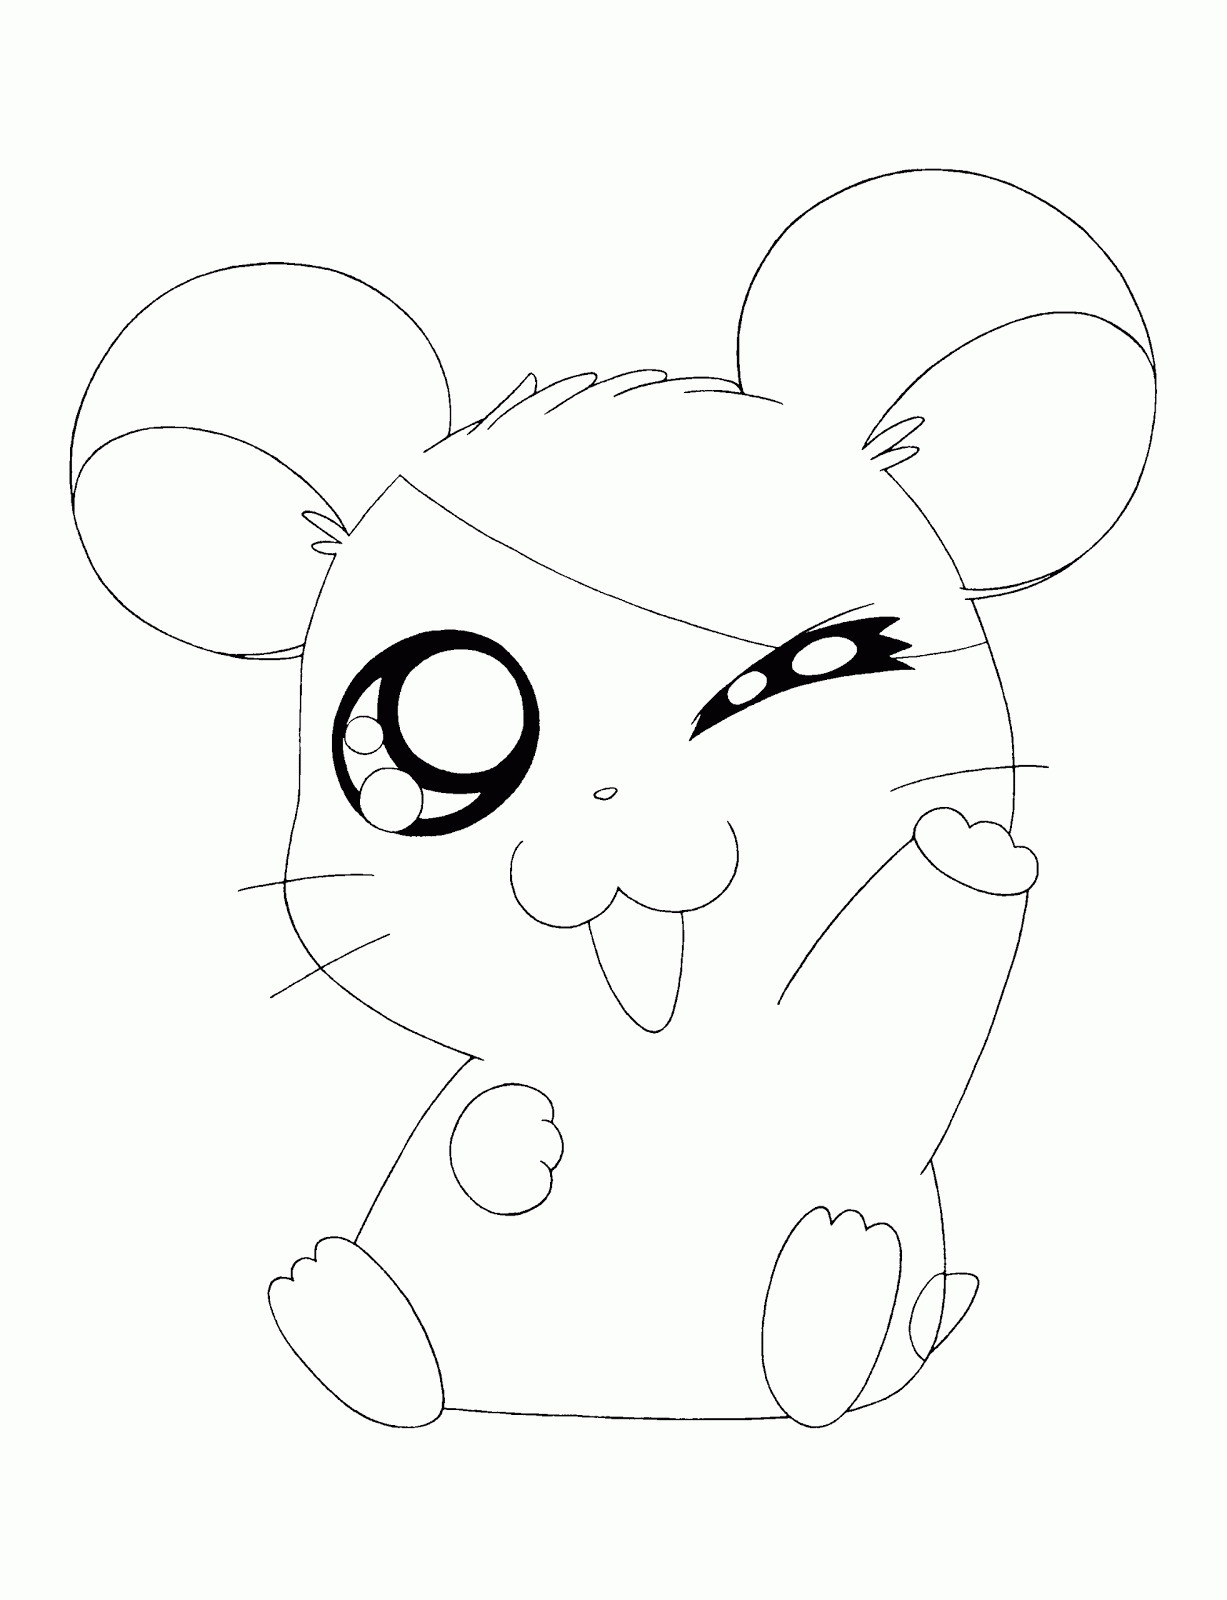 Free Cute Anime Animals Coloring Pages, Download Free Cute Anime ...